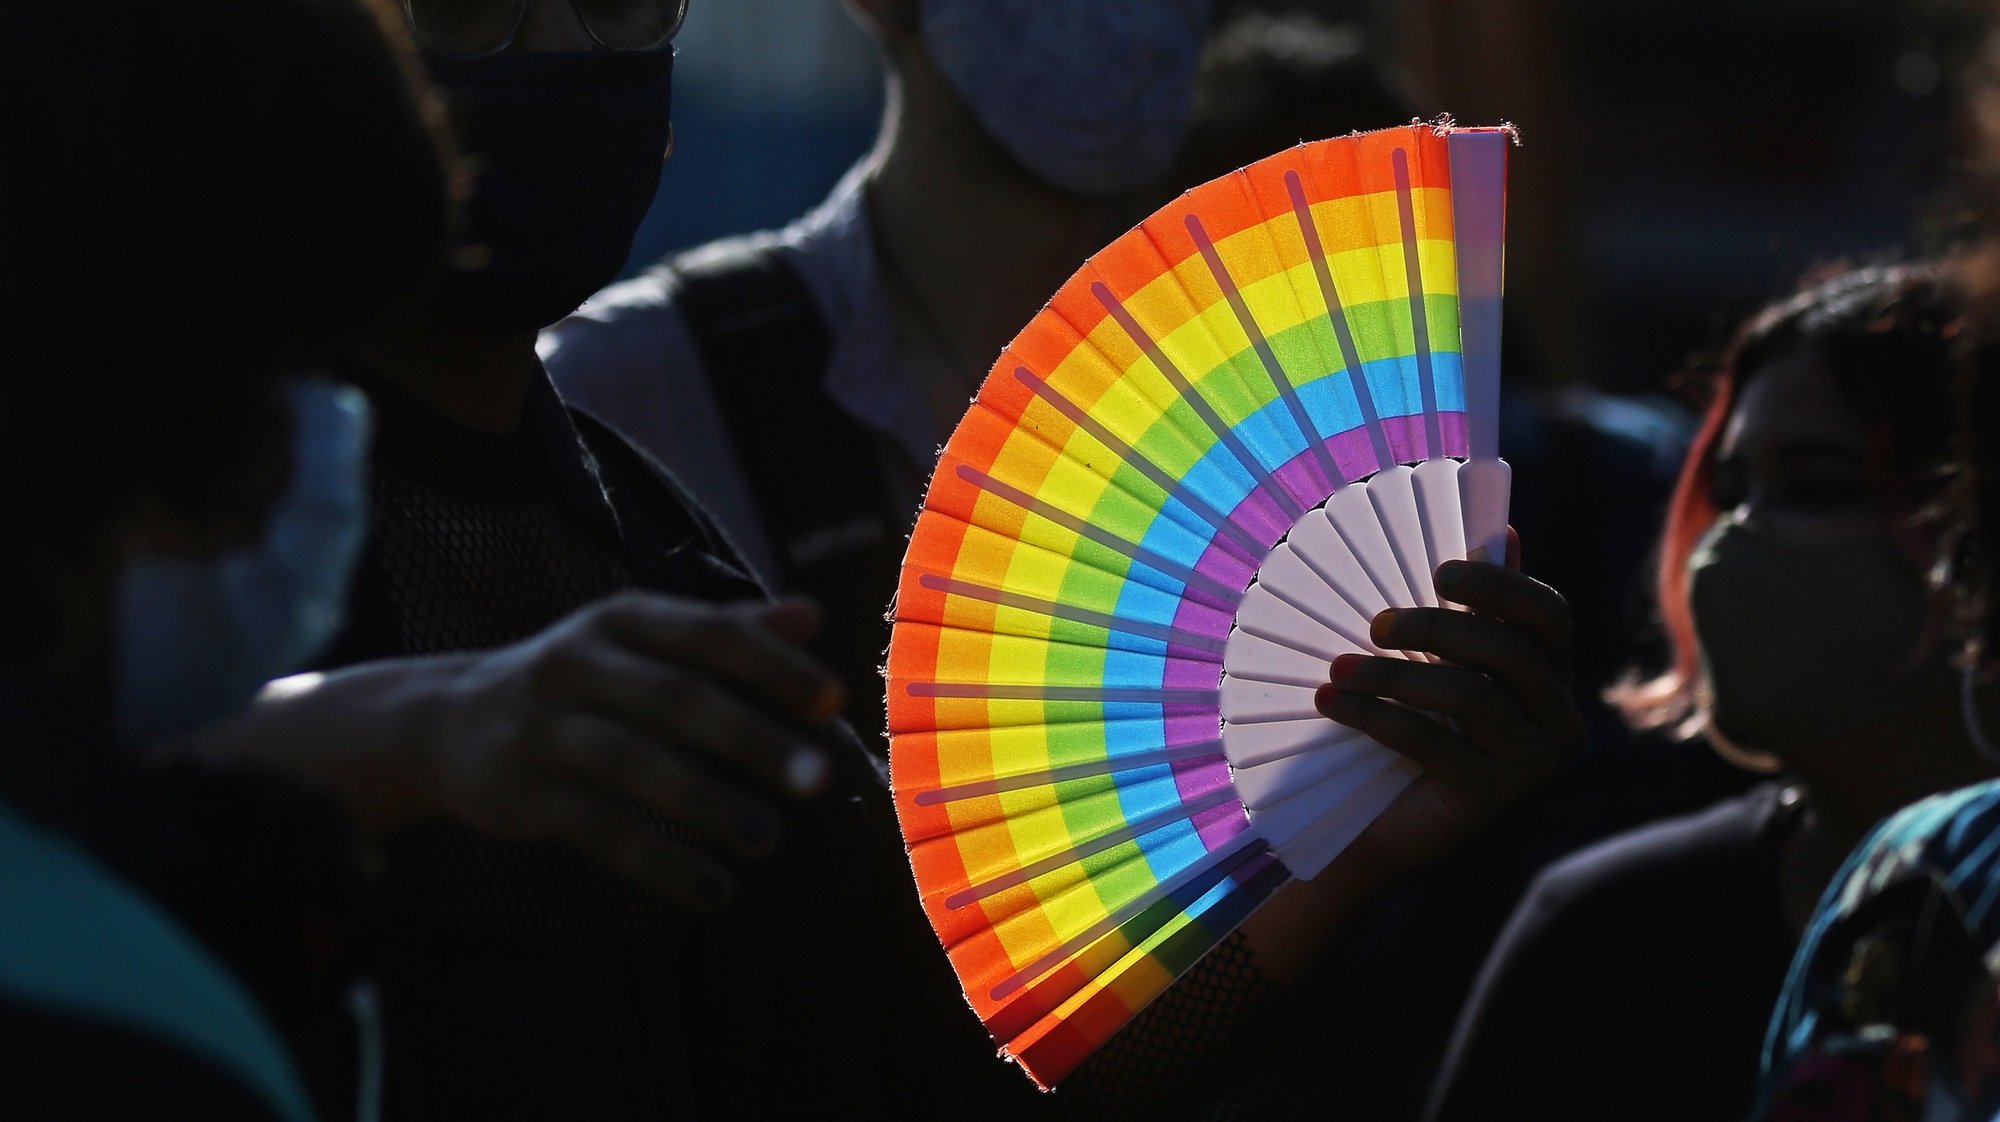 epa08906388 A participant holds a rainbow-colored fan during the LGBT (Lesbian, Gay, Bisexual, and Transgender) pride march in Bangalore, India, 27 December 2020. Hundreds of LGBTQ people and their supporters waved flags, beat drums, and danced to local tunes during the Bengaluru Namma Pride March. They called to end violence and oppression based on gender identity and sexual orientation and to end gender decriminalization.  EPA/JAGADEESH NV